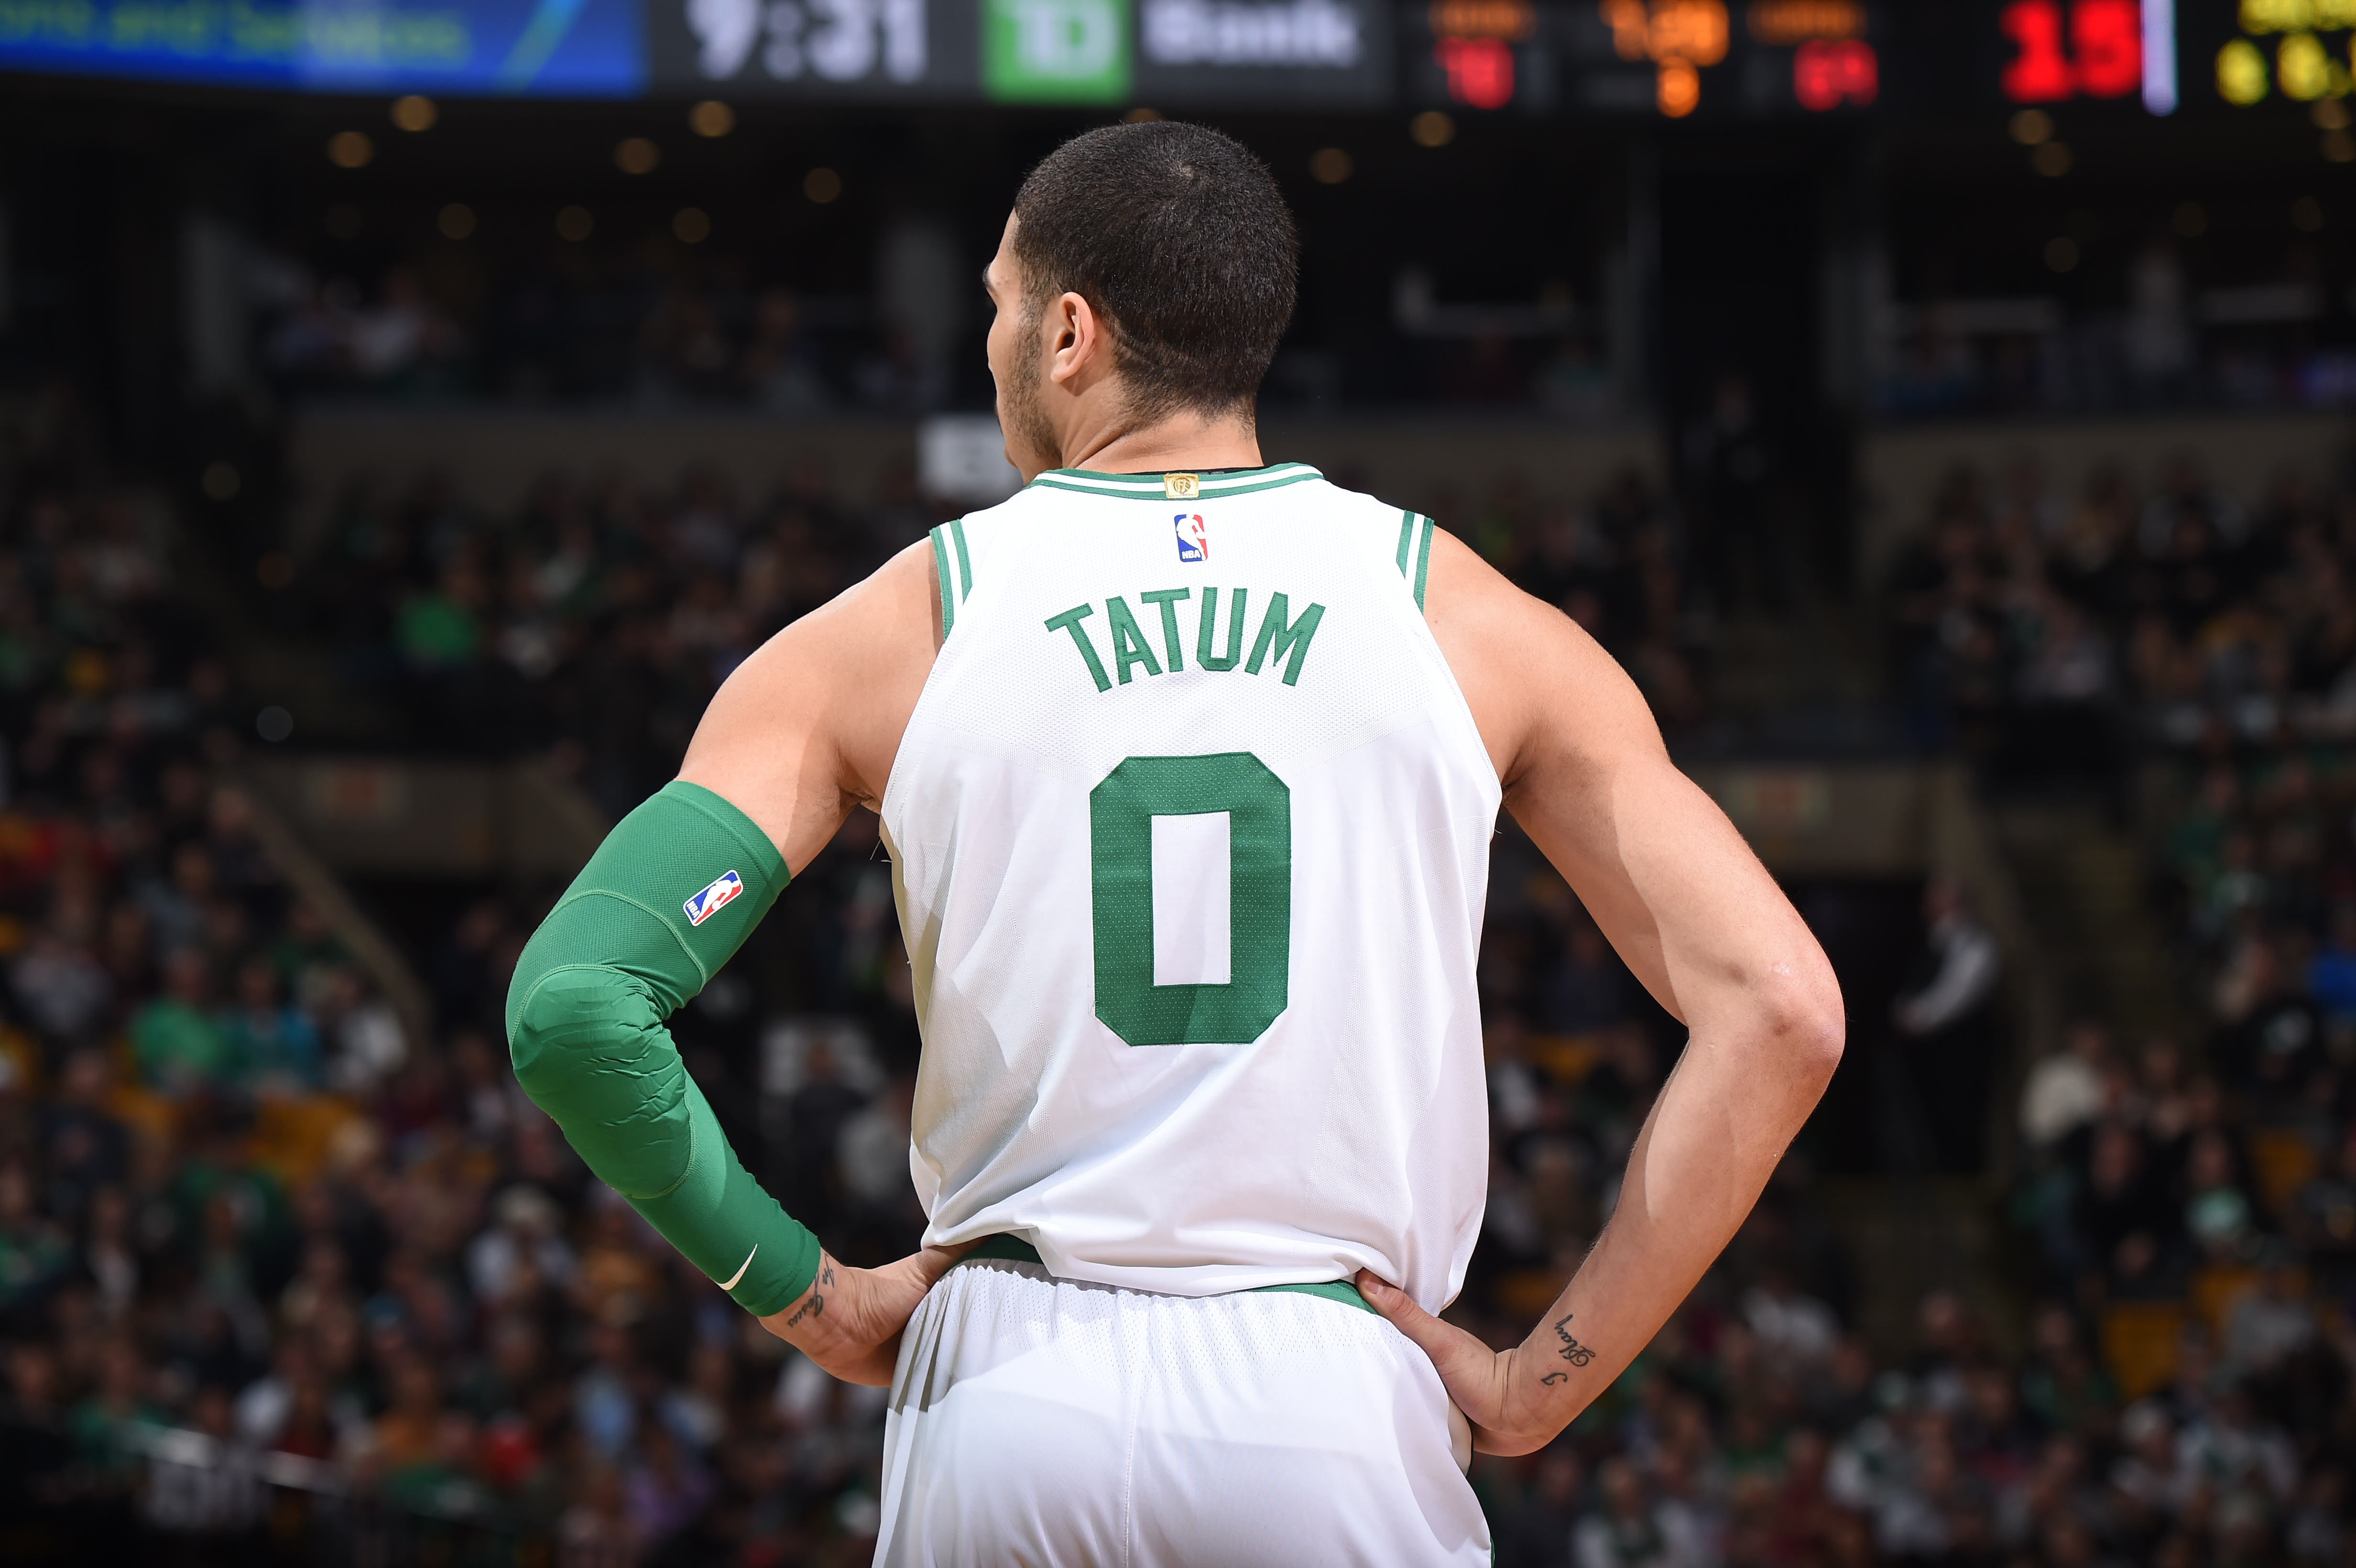 This is a photo of Jayson Tatum